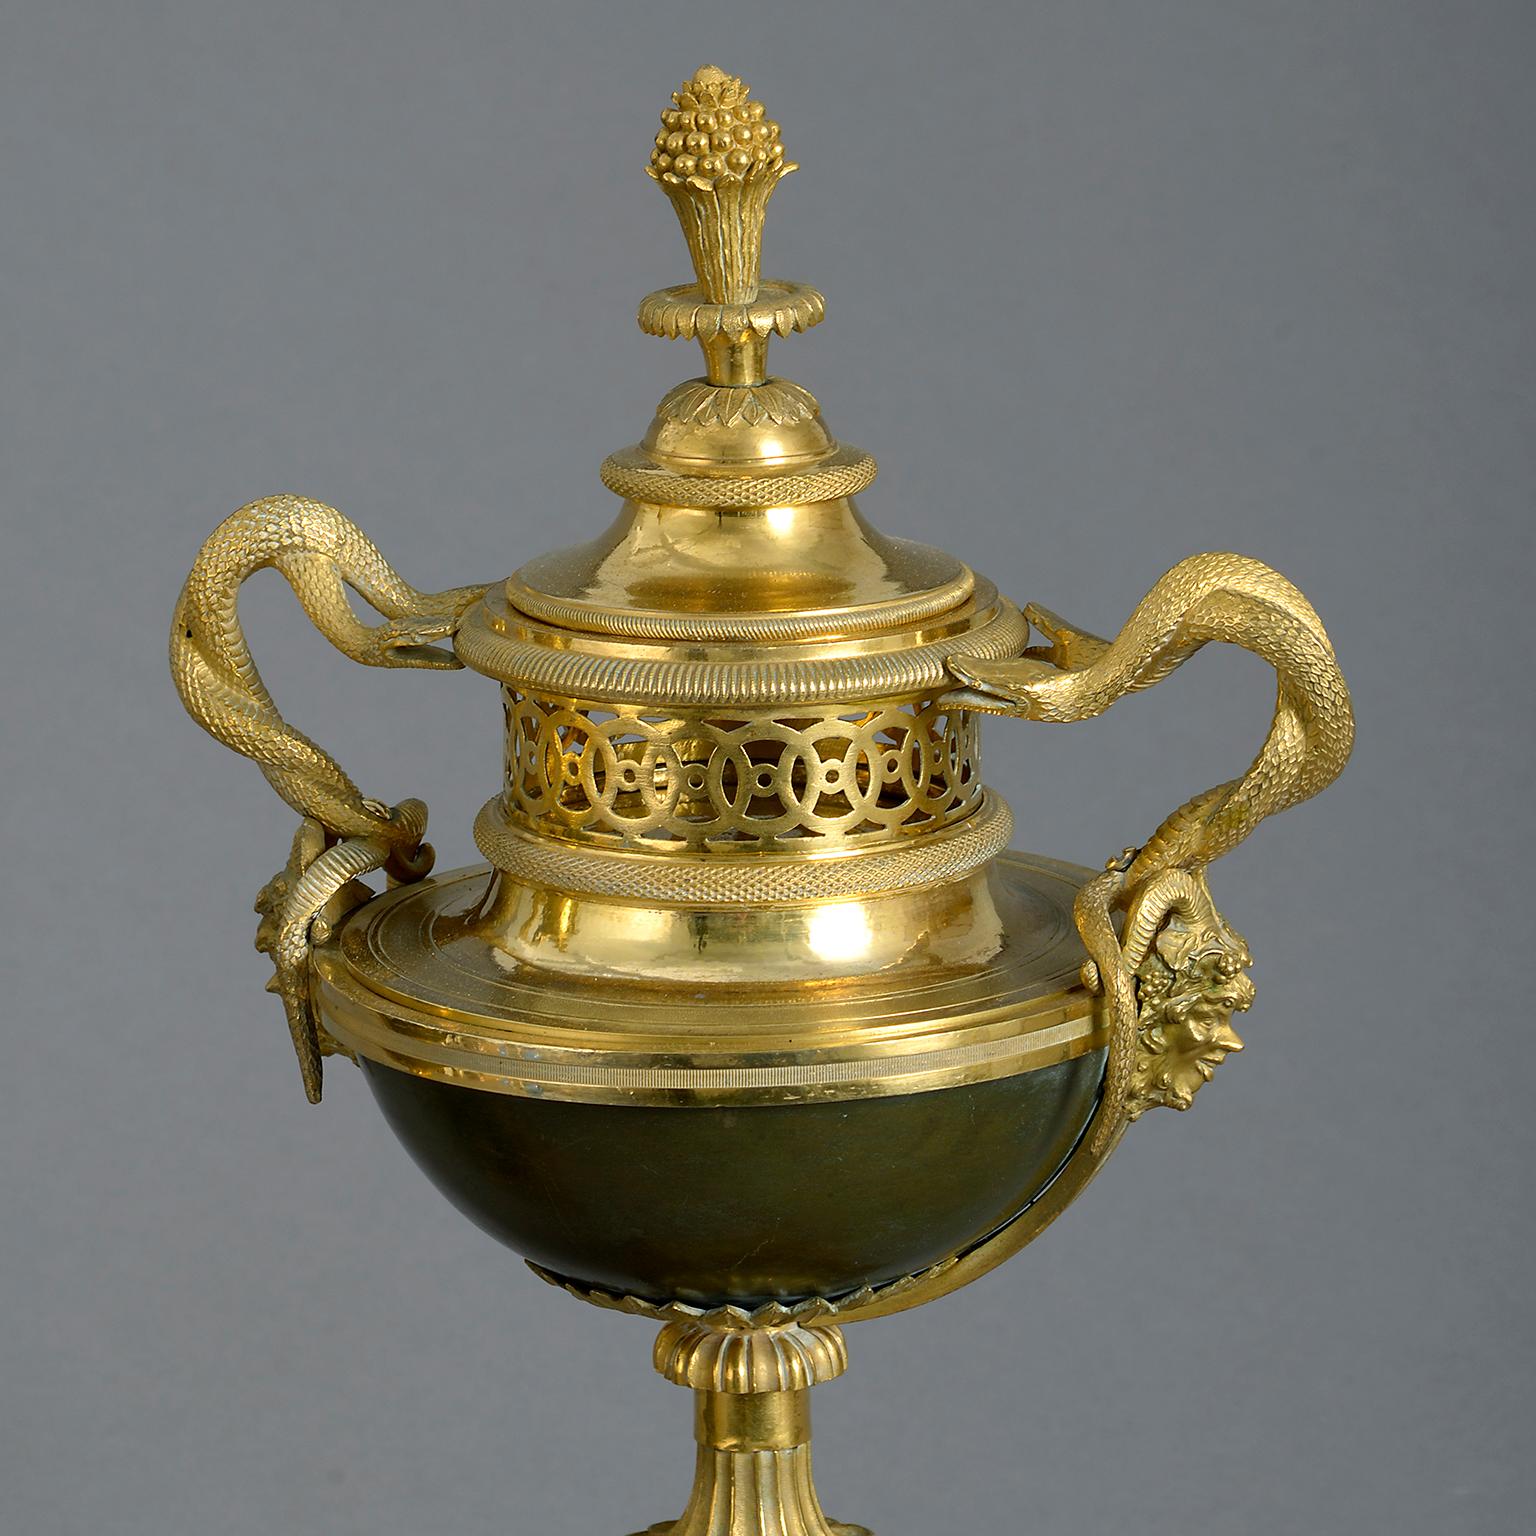 Neoclassical Early 19th Century Pair of Bronze and Ormolu Perfume Burners or Pot-Pourri Vases